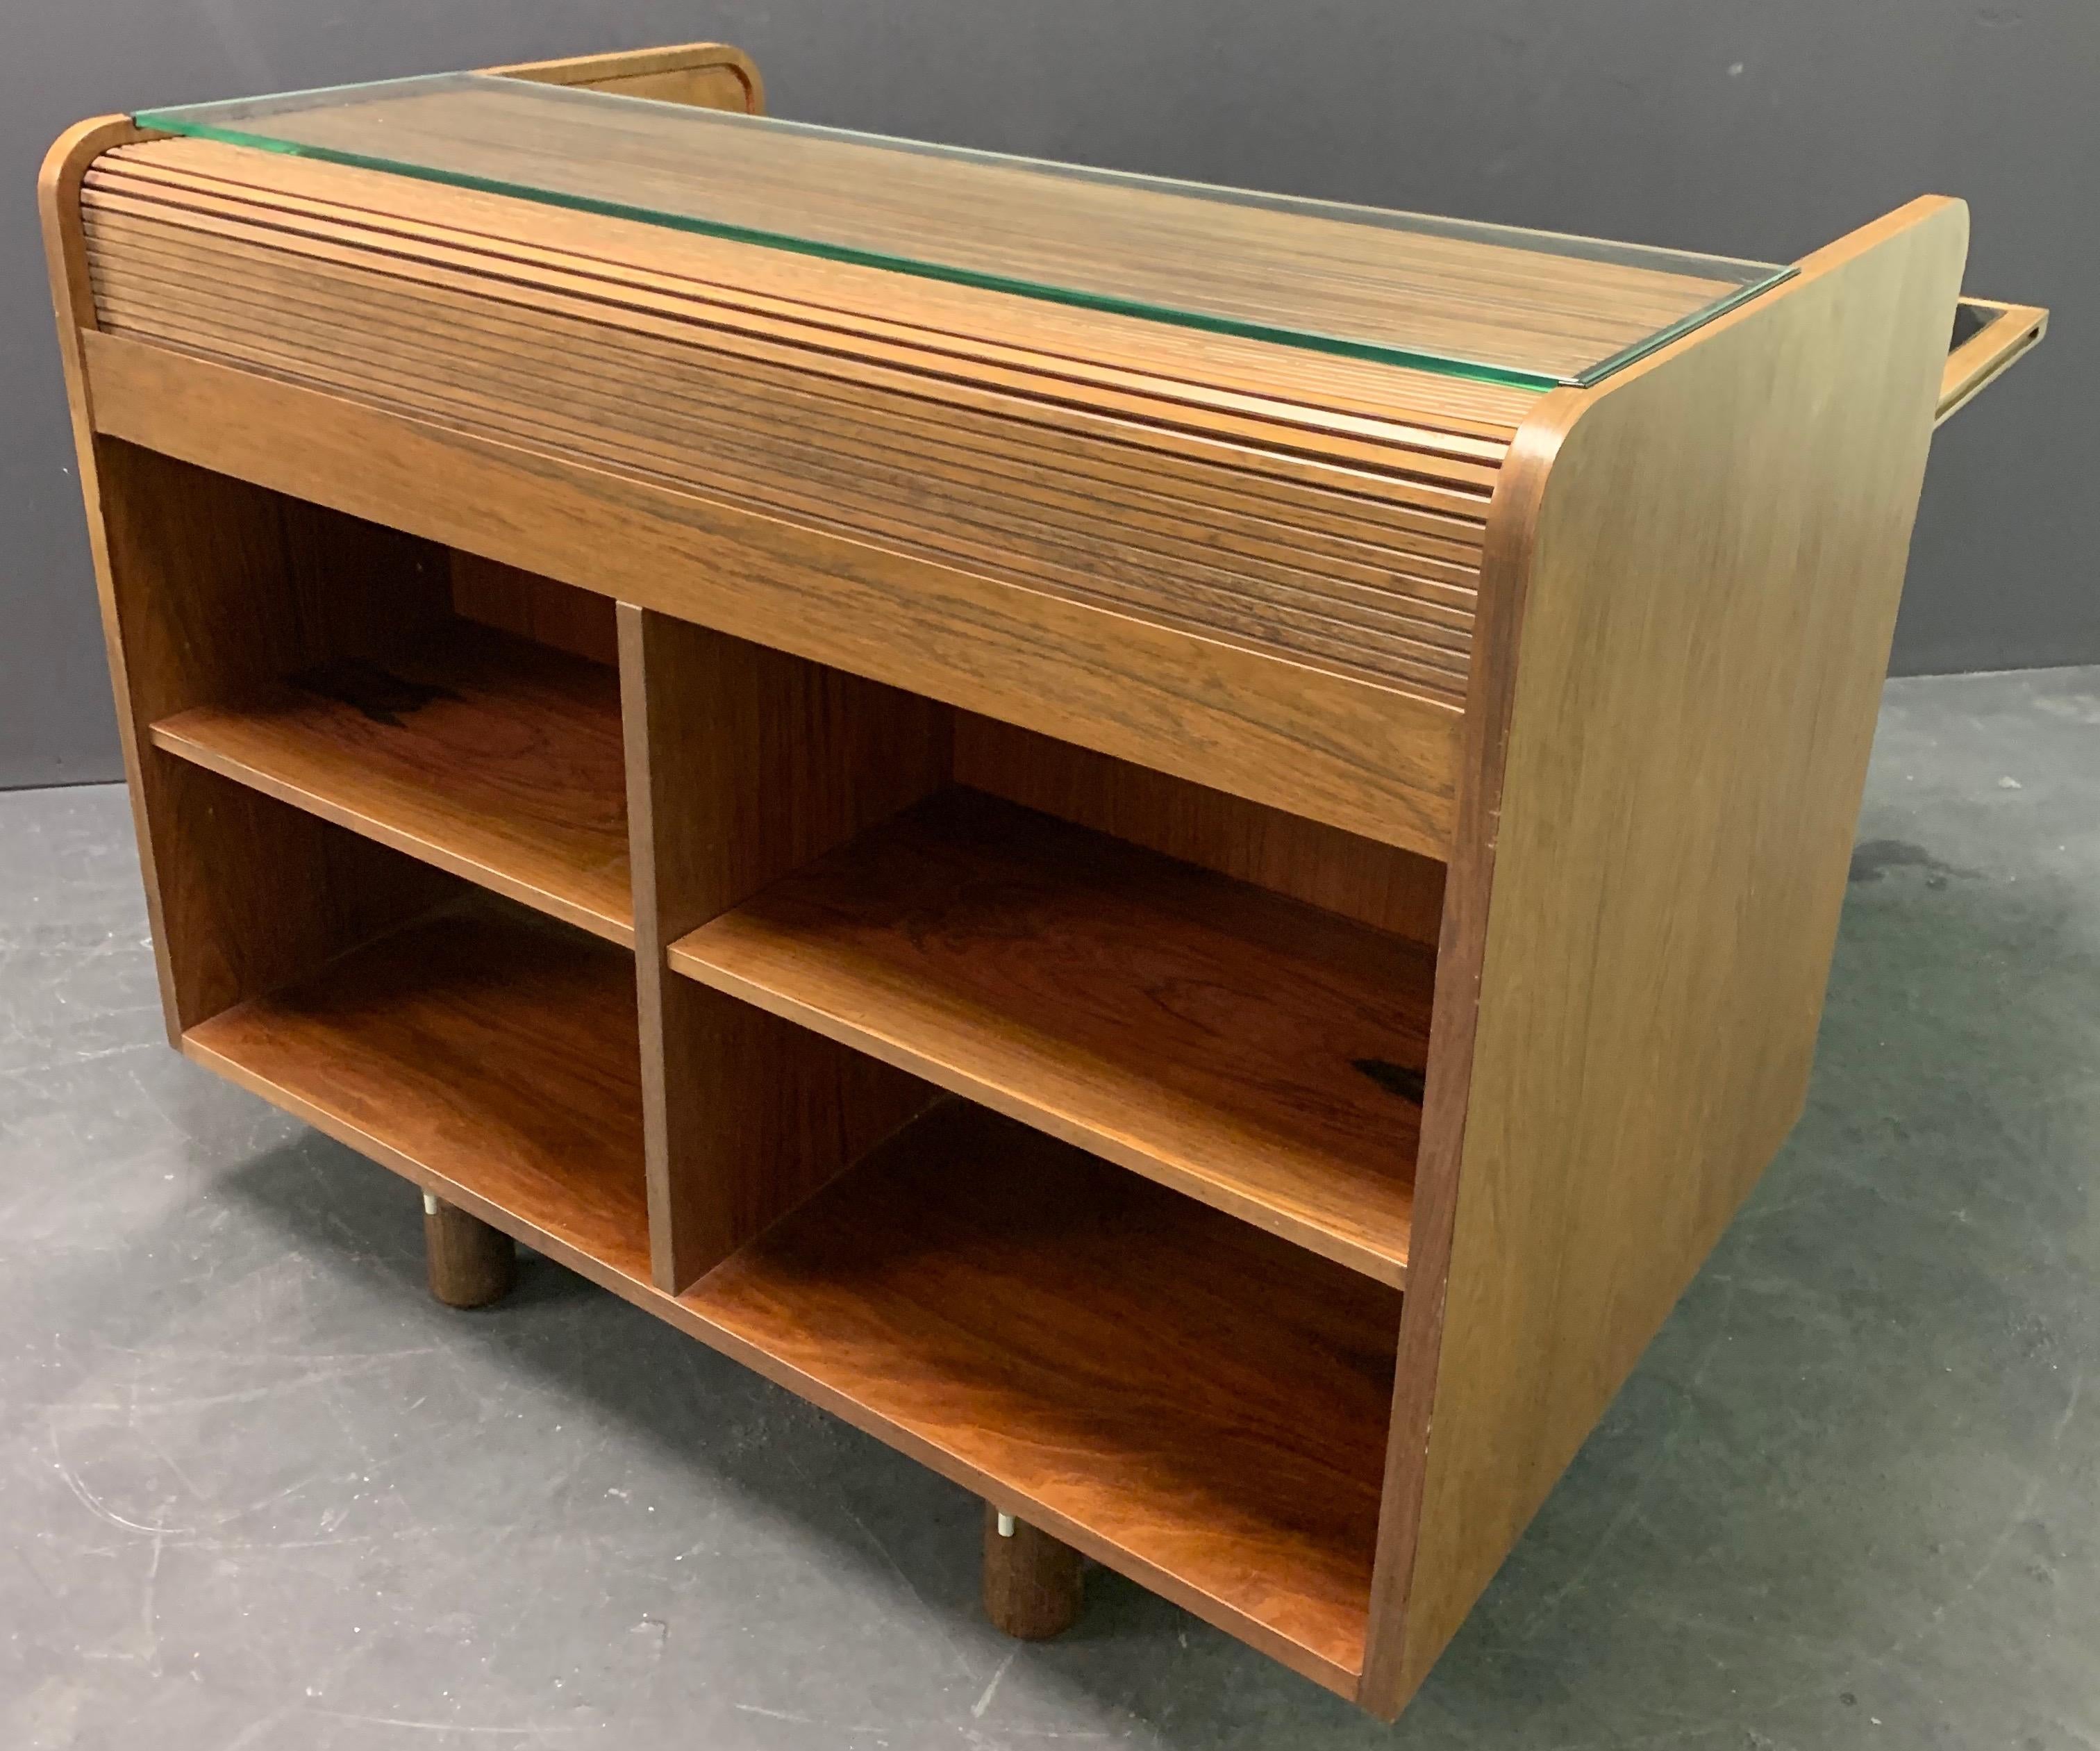 Walnut, leather an aluminum. The secretary is a practical piece of furniture as it offers plenty of storage space. On the front side there are ten large drawers. A writing surface can be pulled out that opens the secretary. A writing section above